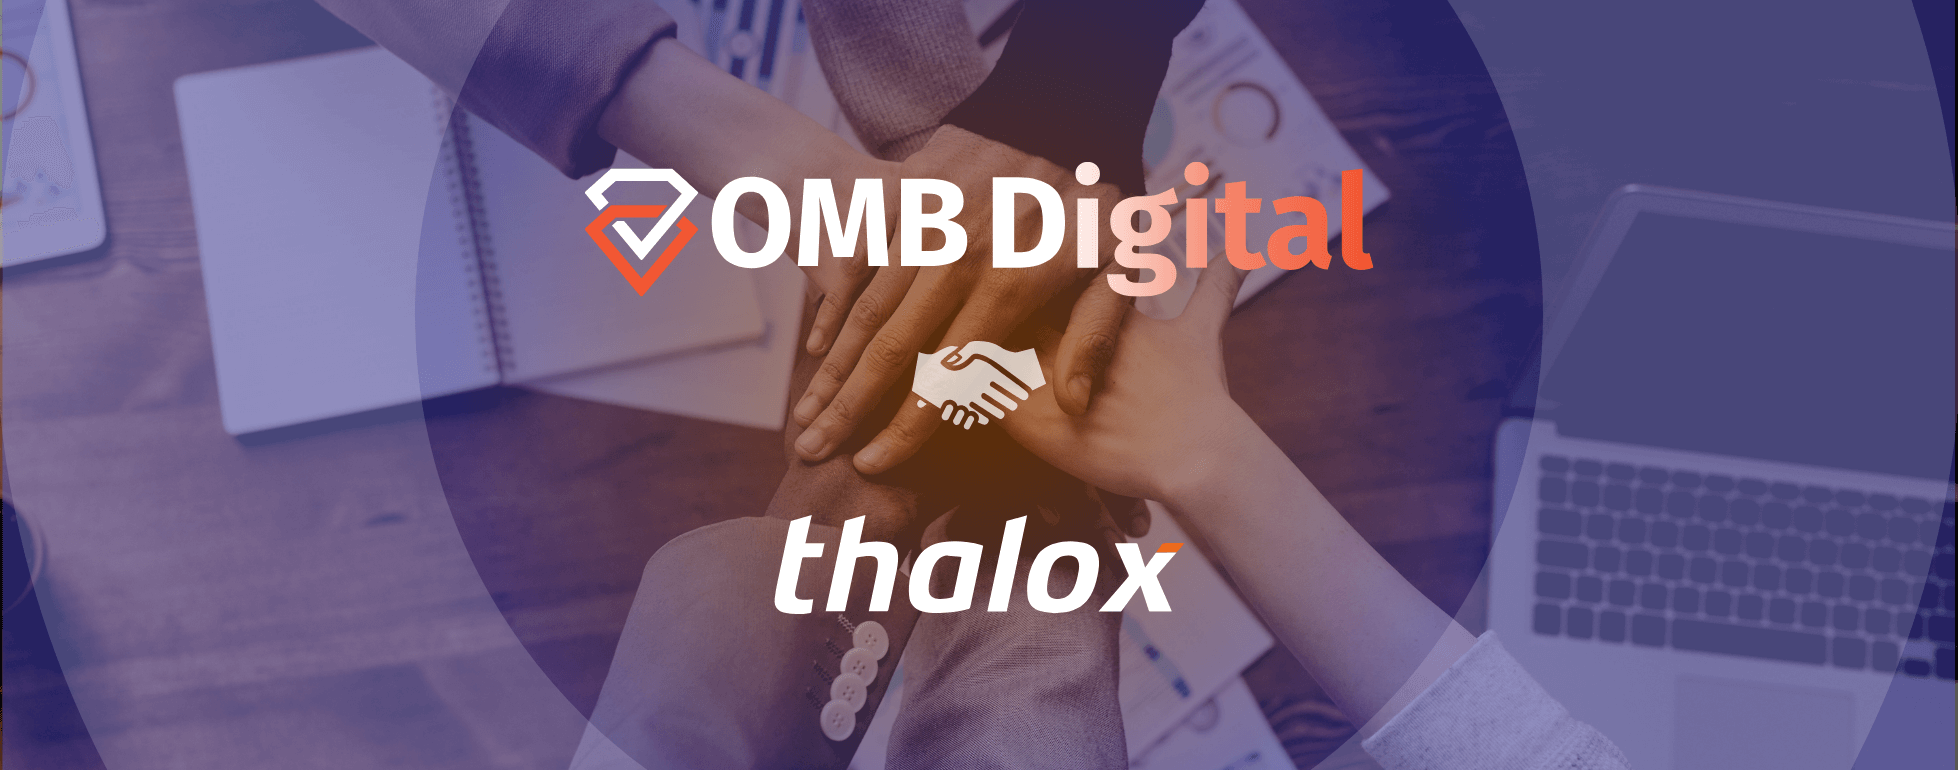 Personalized Marketing OMB Digital and Thalox